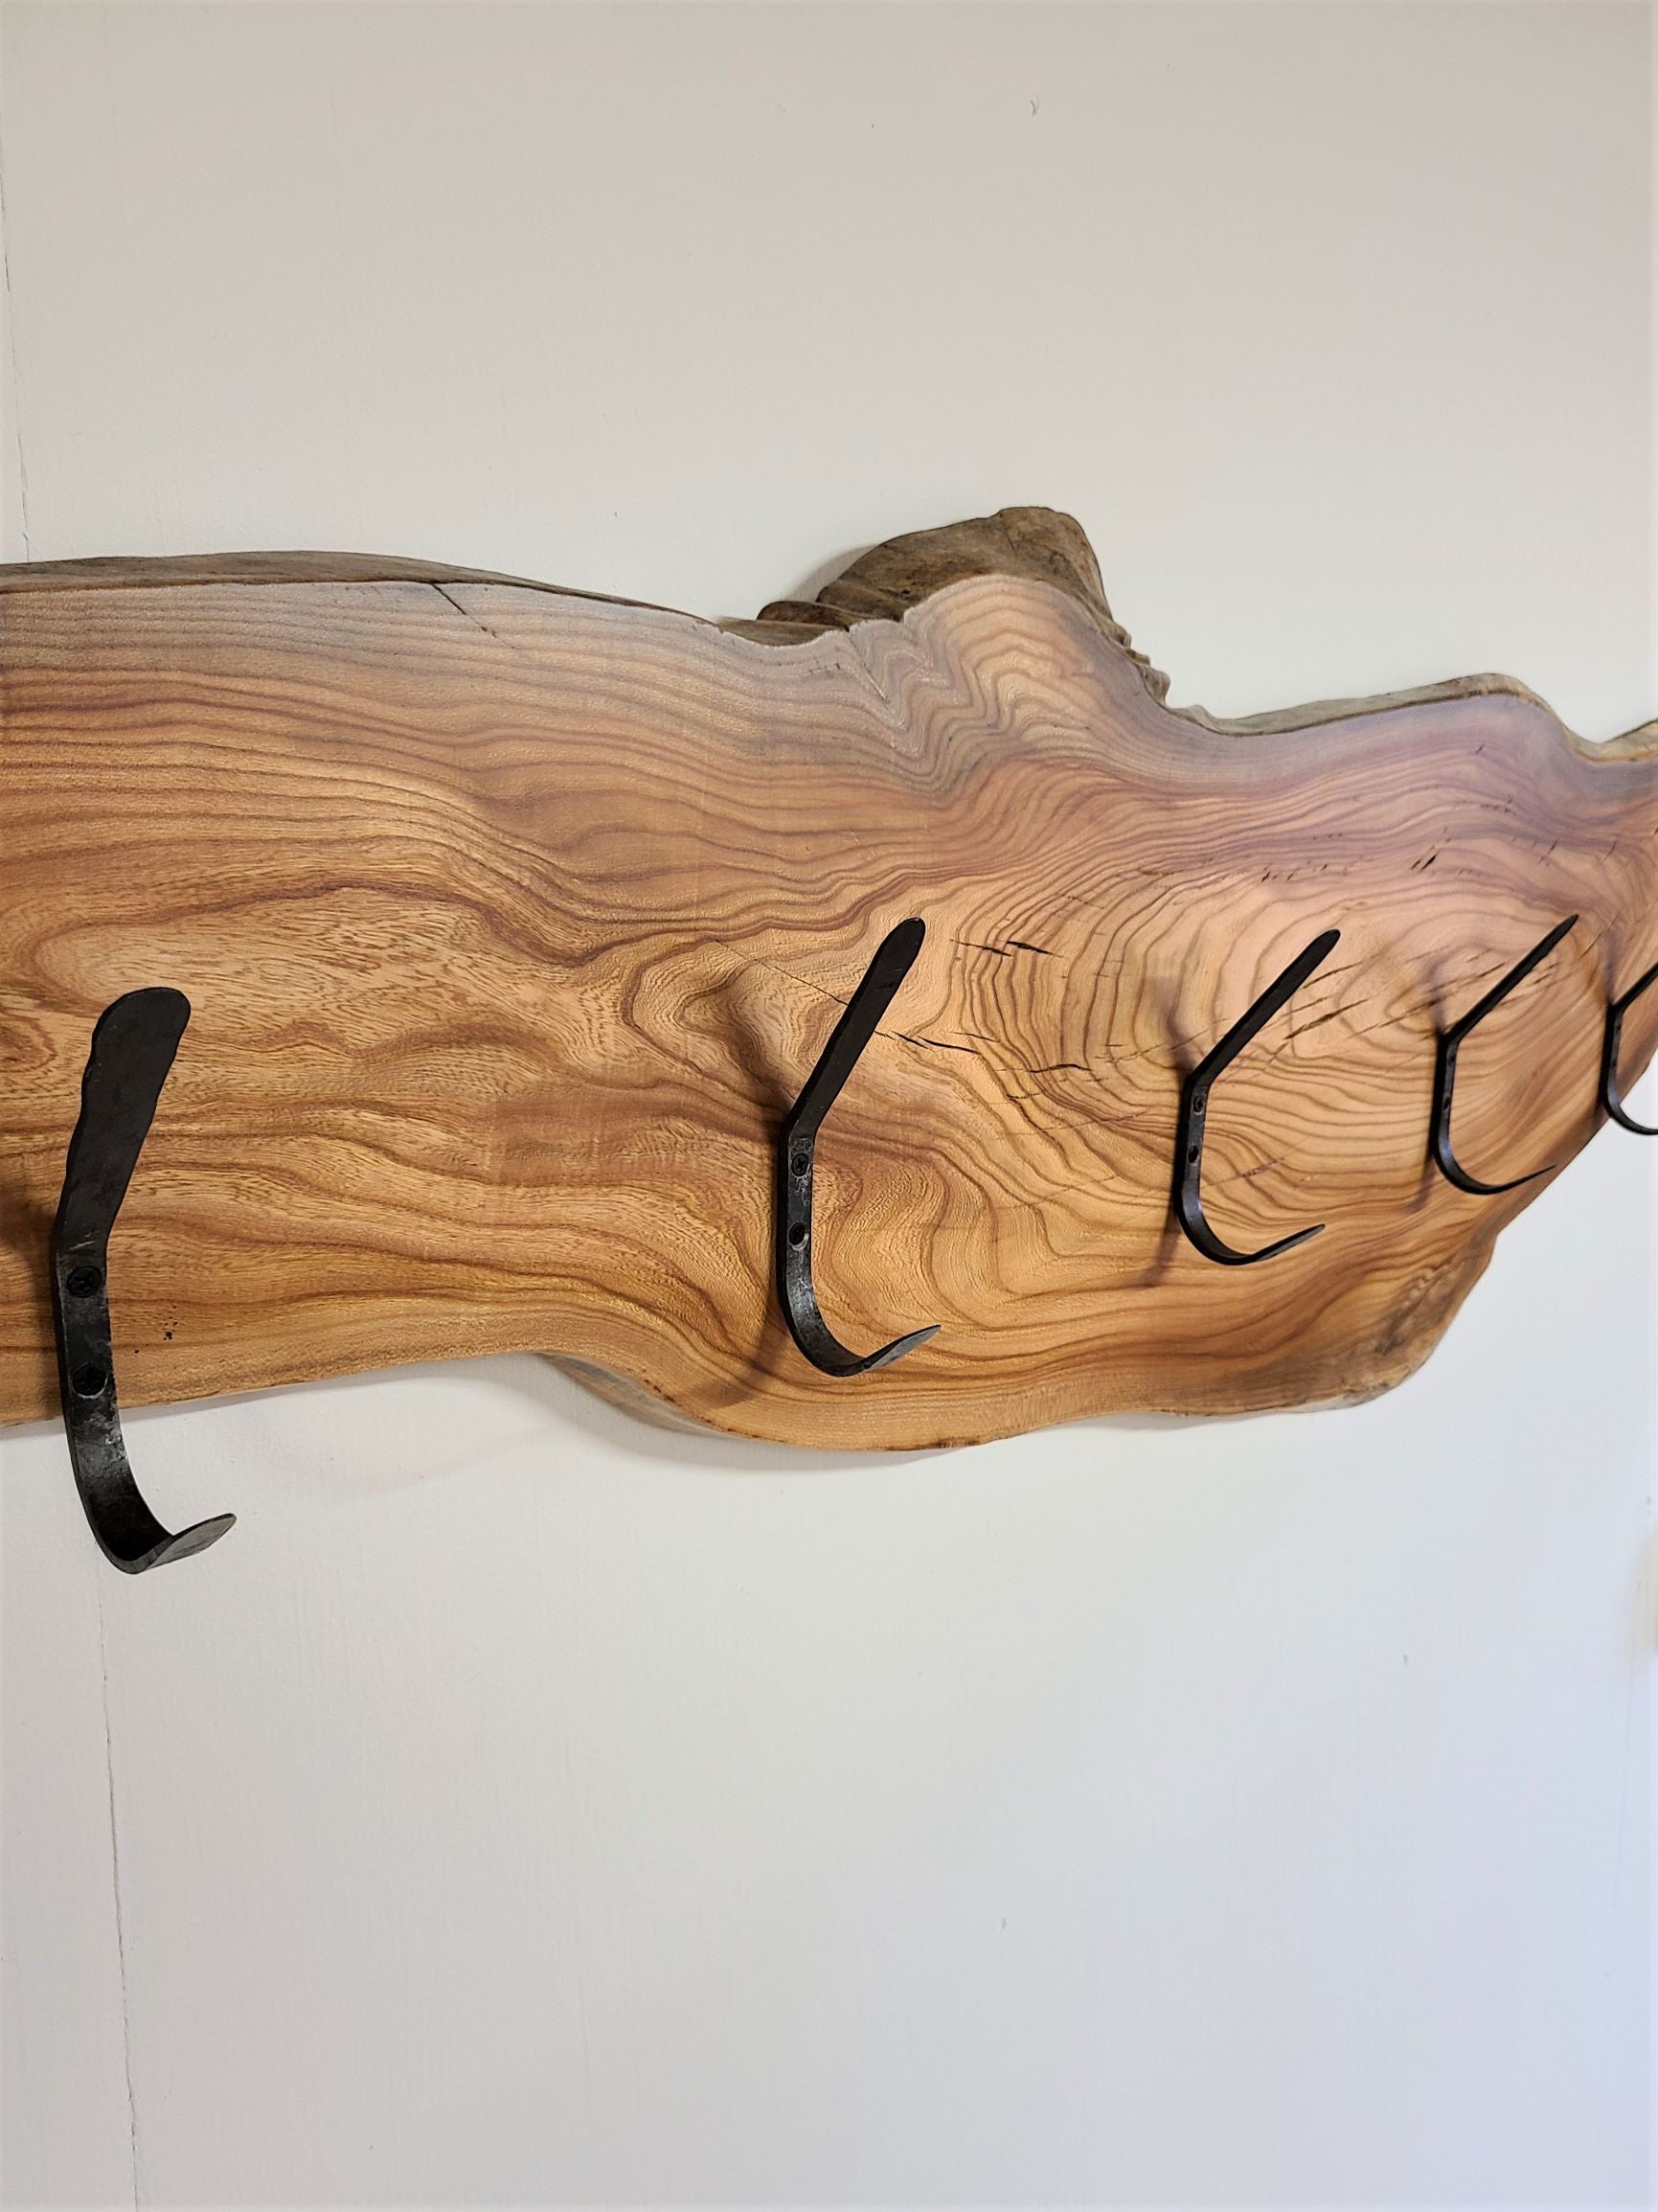 ELM HOOK BOARD / COAT RACK WITH 5 HAND FORGED STEEL DOUBLE 